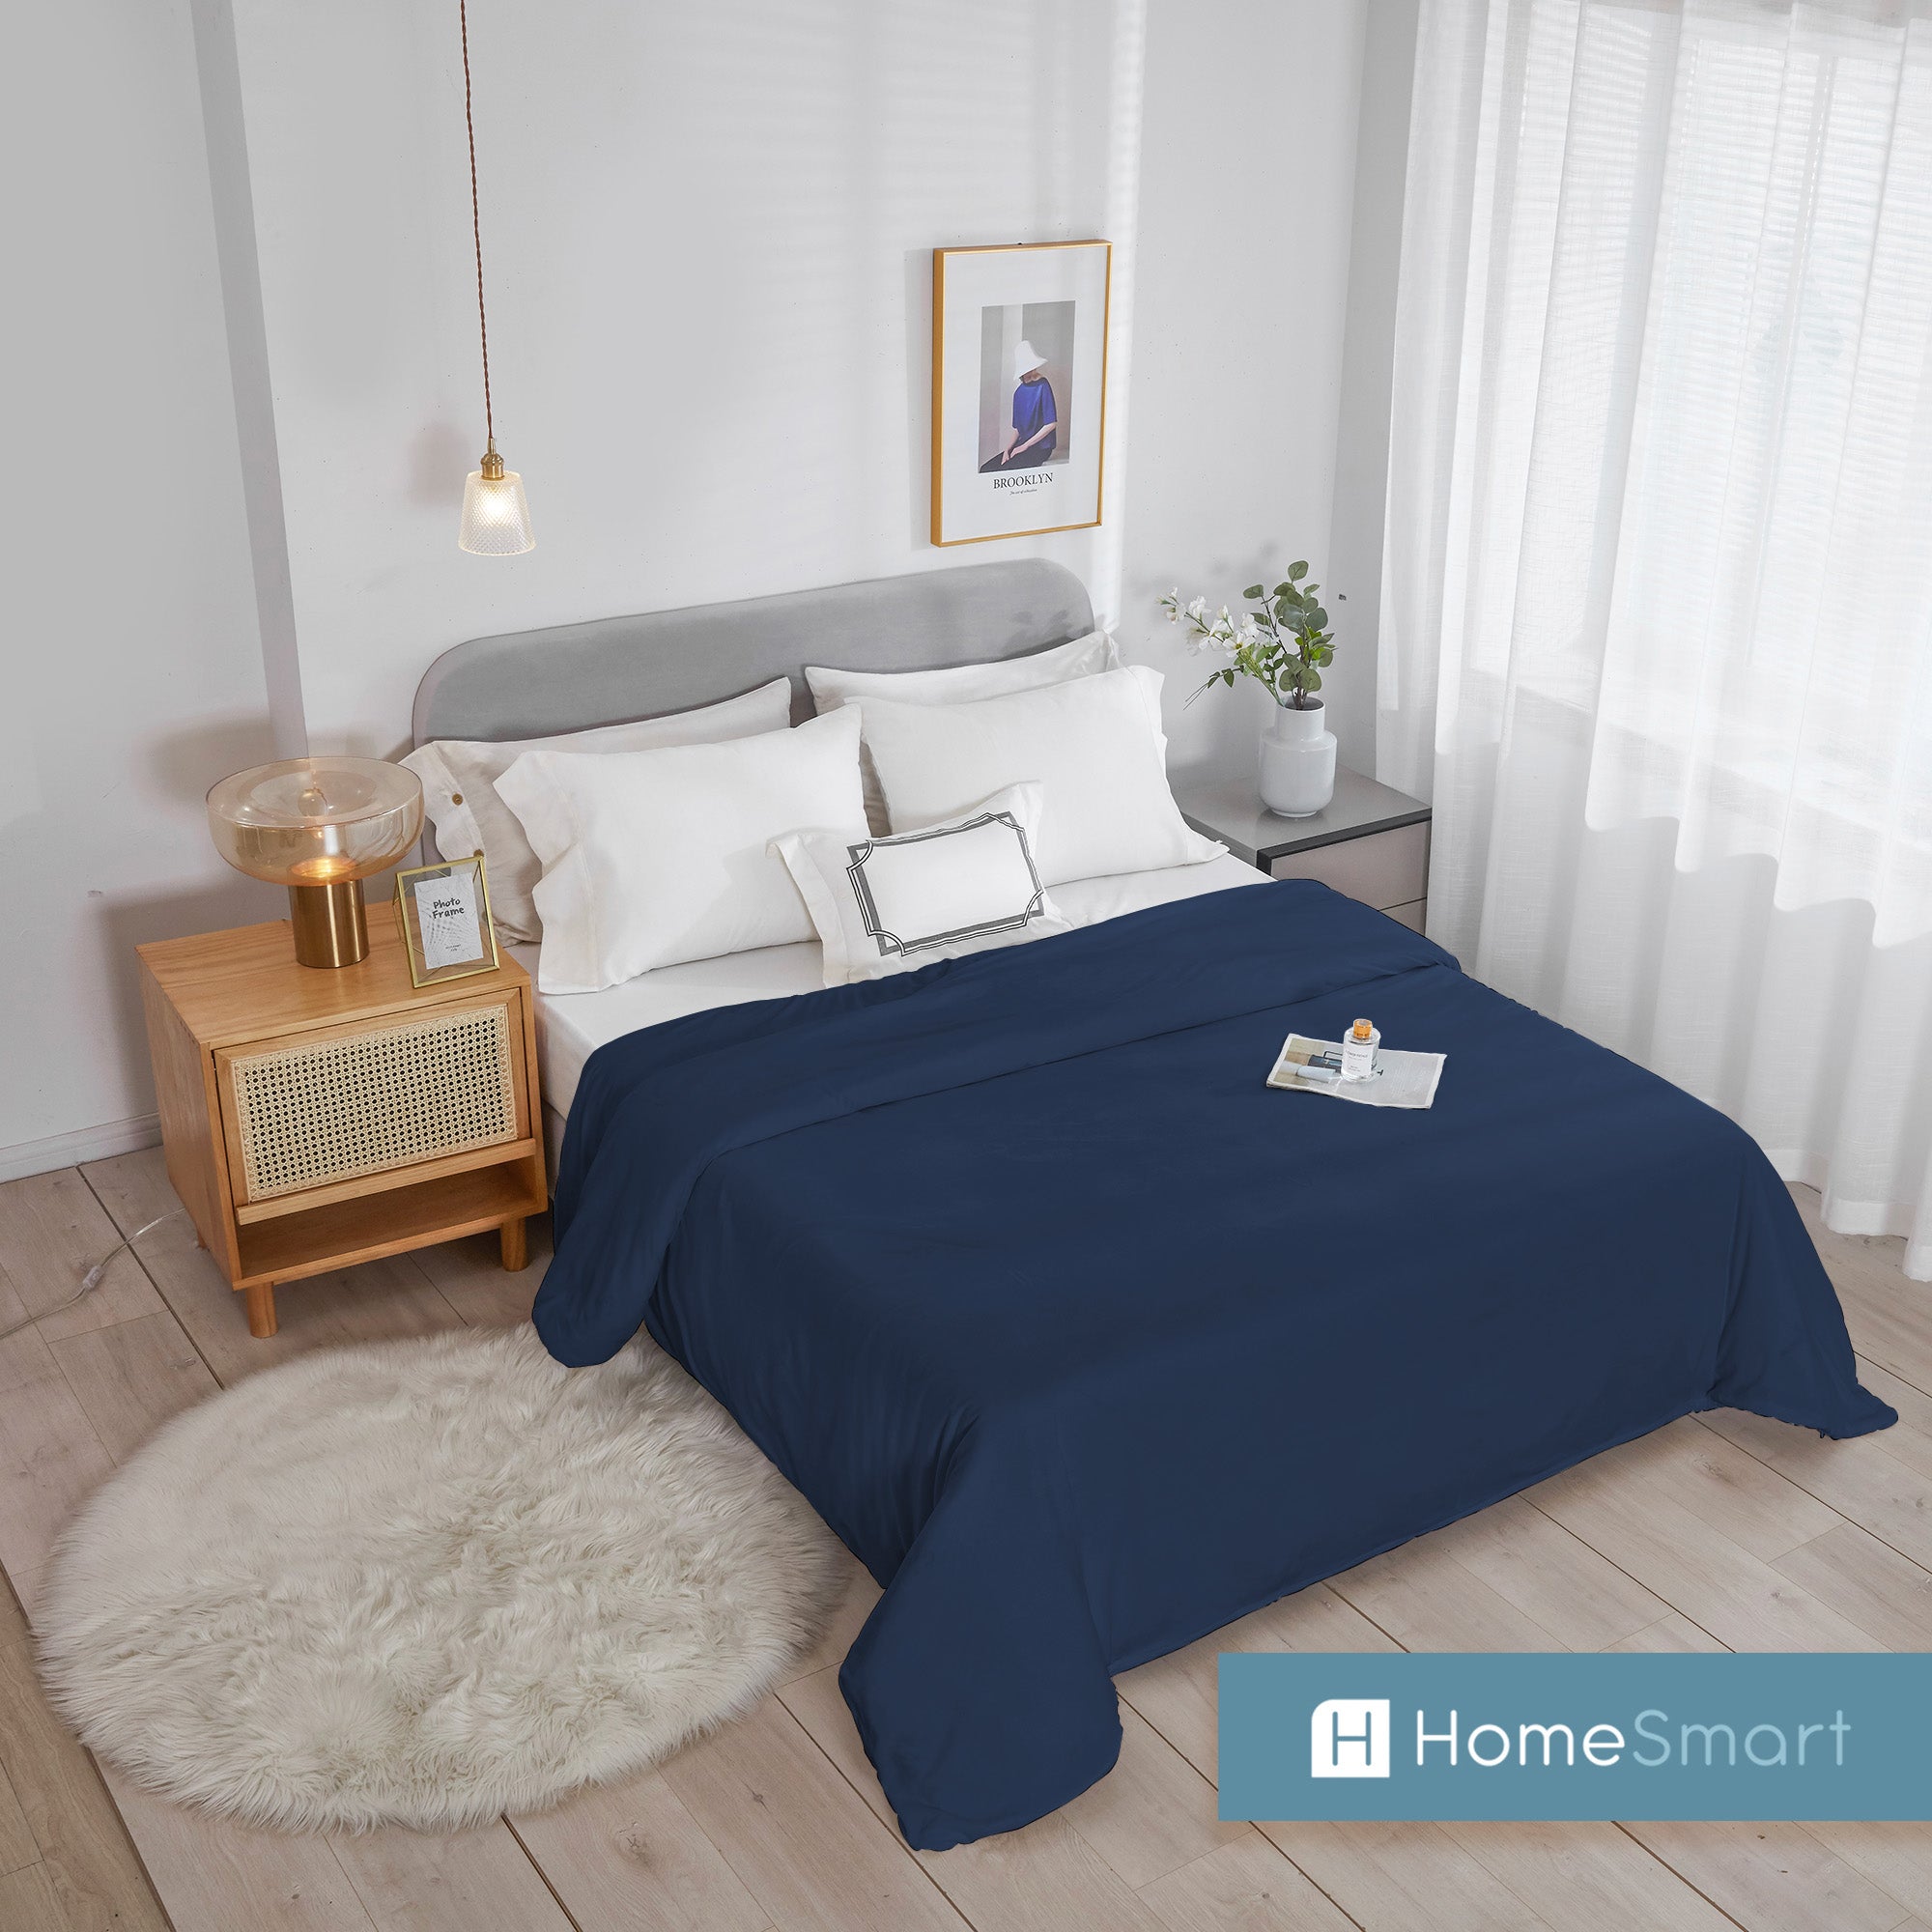 HomeSmart Weighted Blanket for Couples - HomeSmart Products